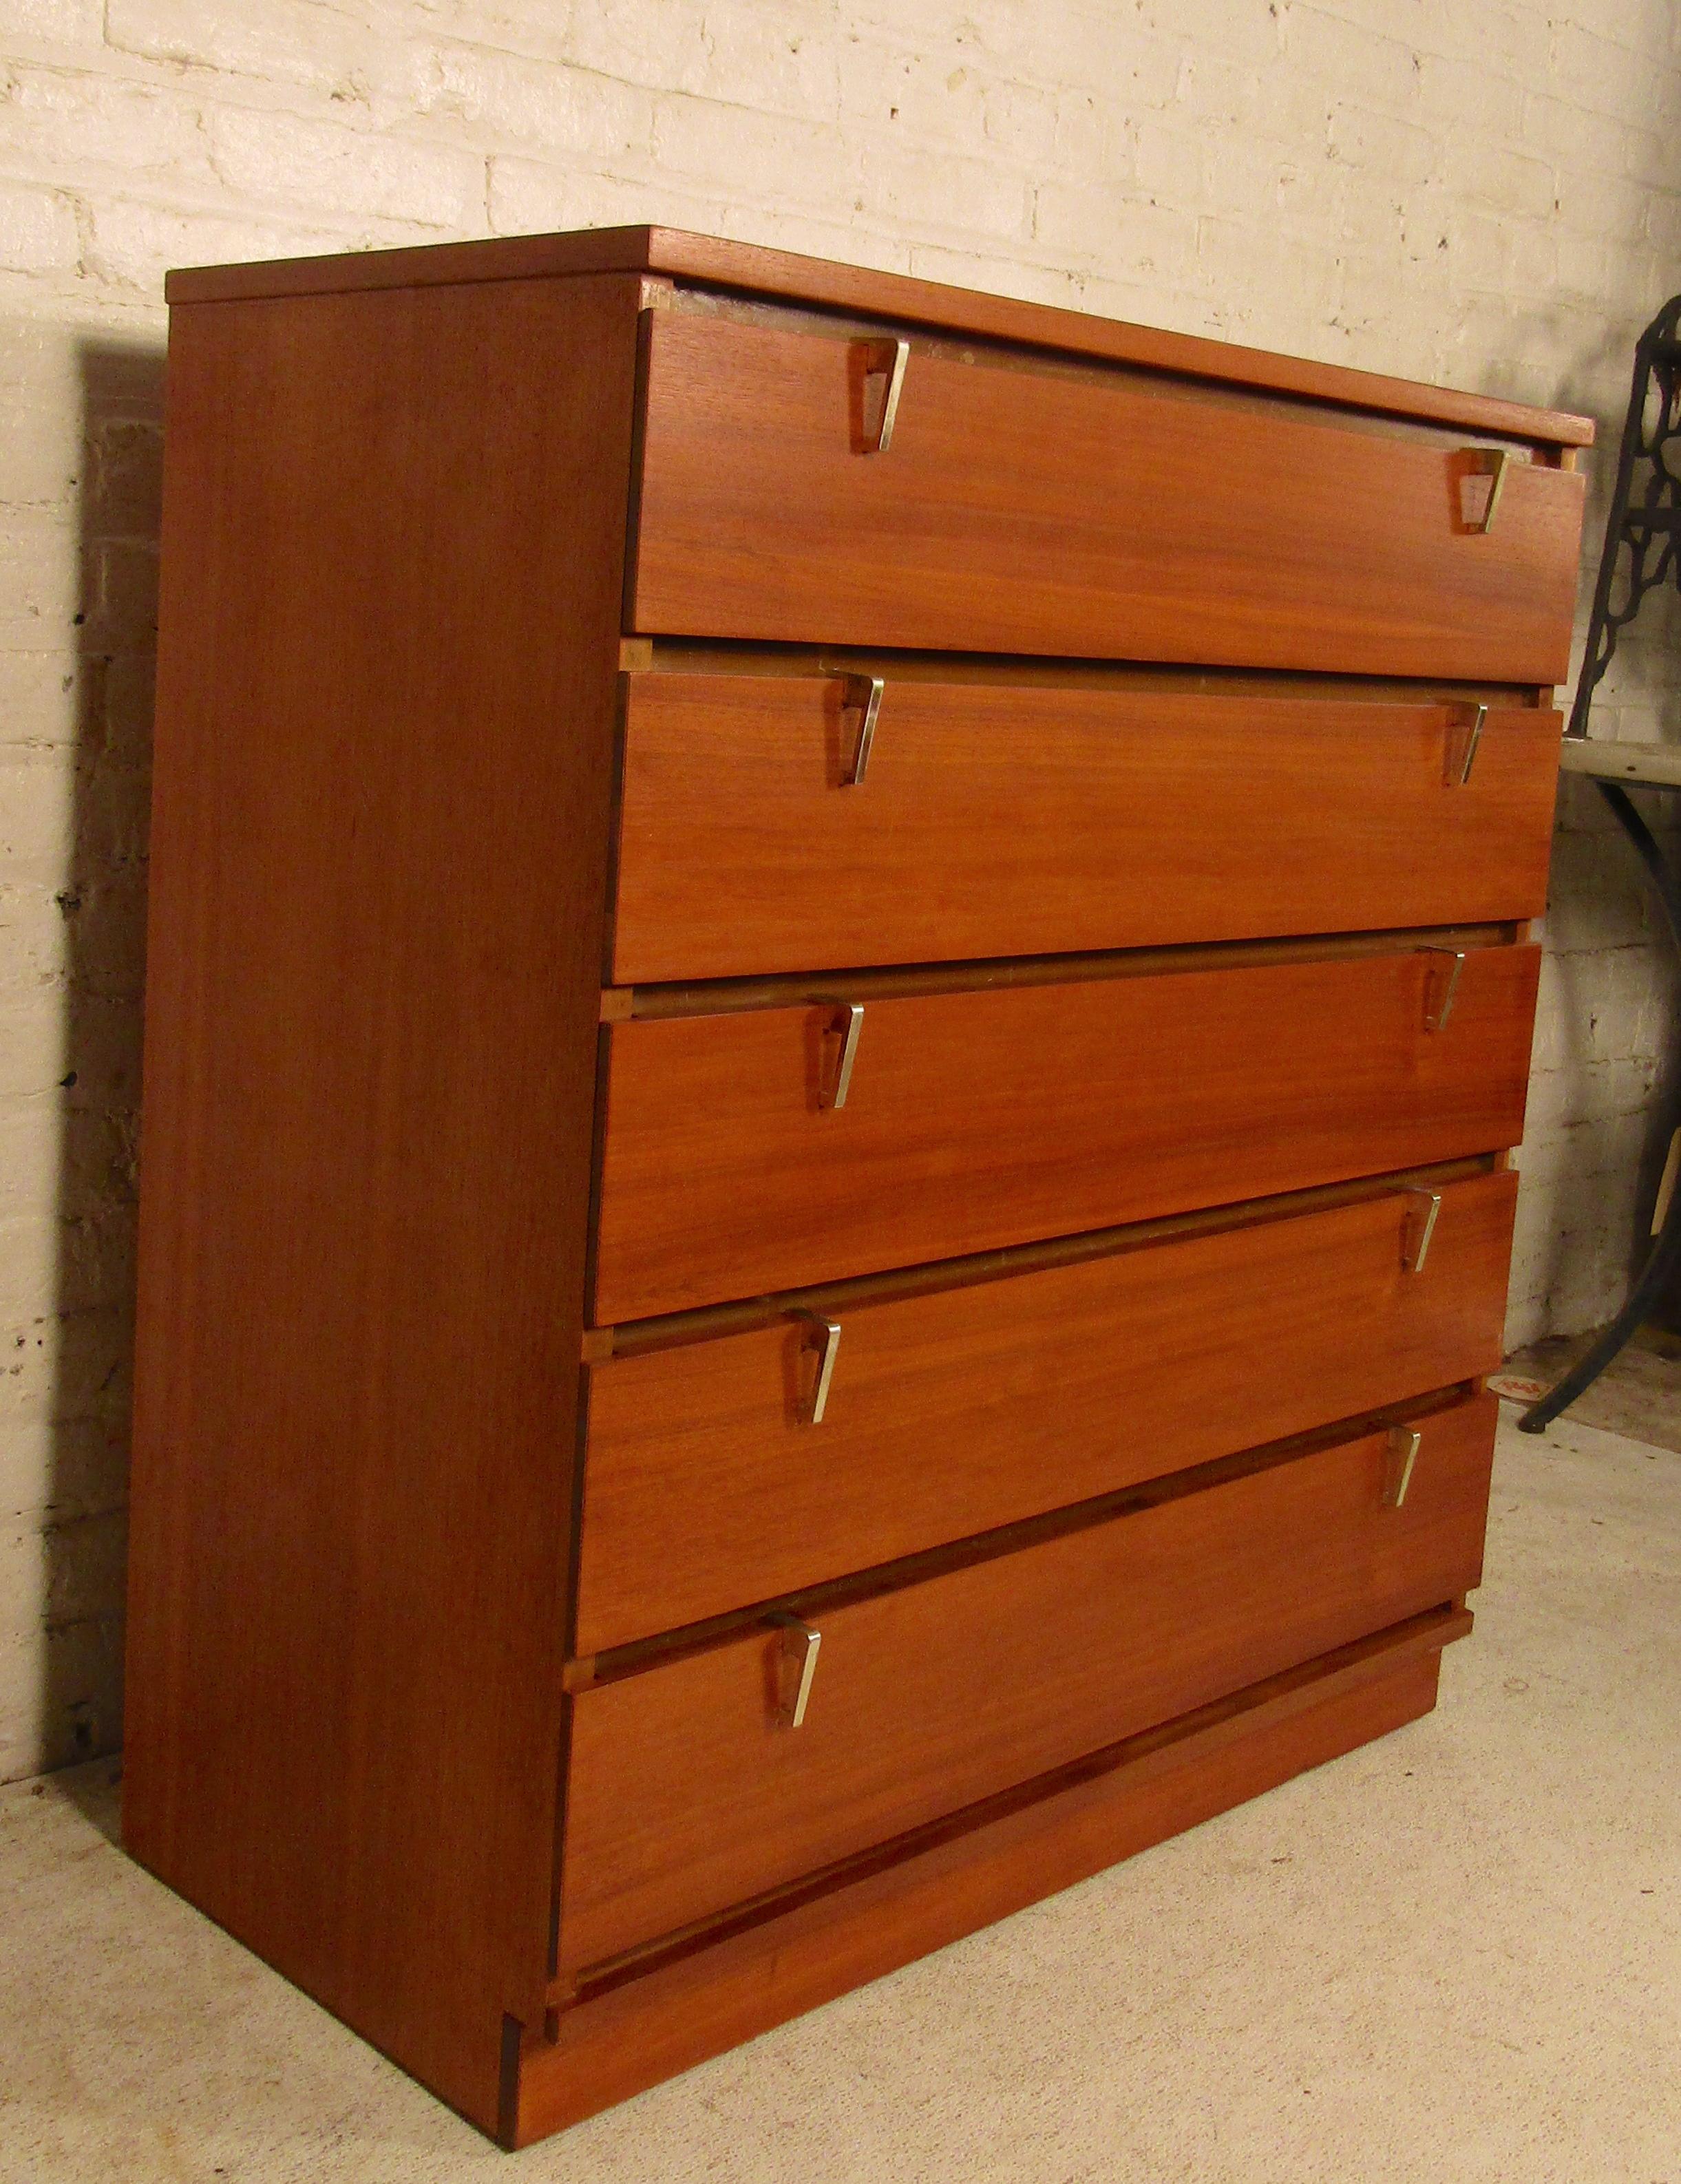 Vintage modern dresser with five wide drawers and accenting metal pulls.
Matching nightstand available.
(Please confirm item location - NY or NJ - with dealer).
  